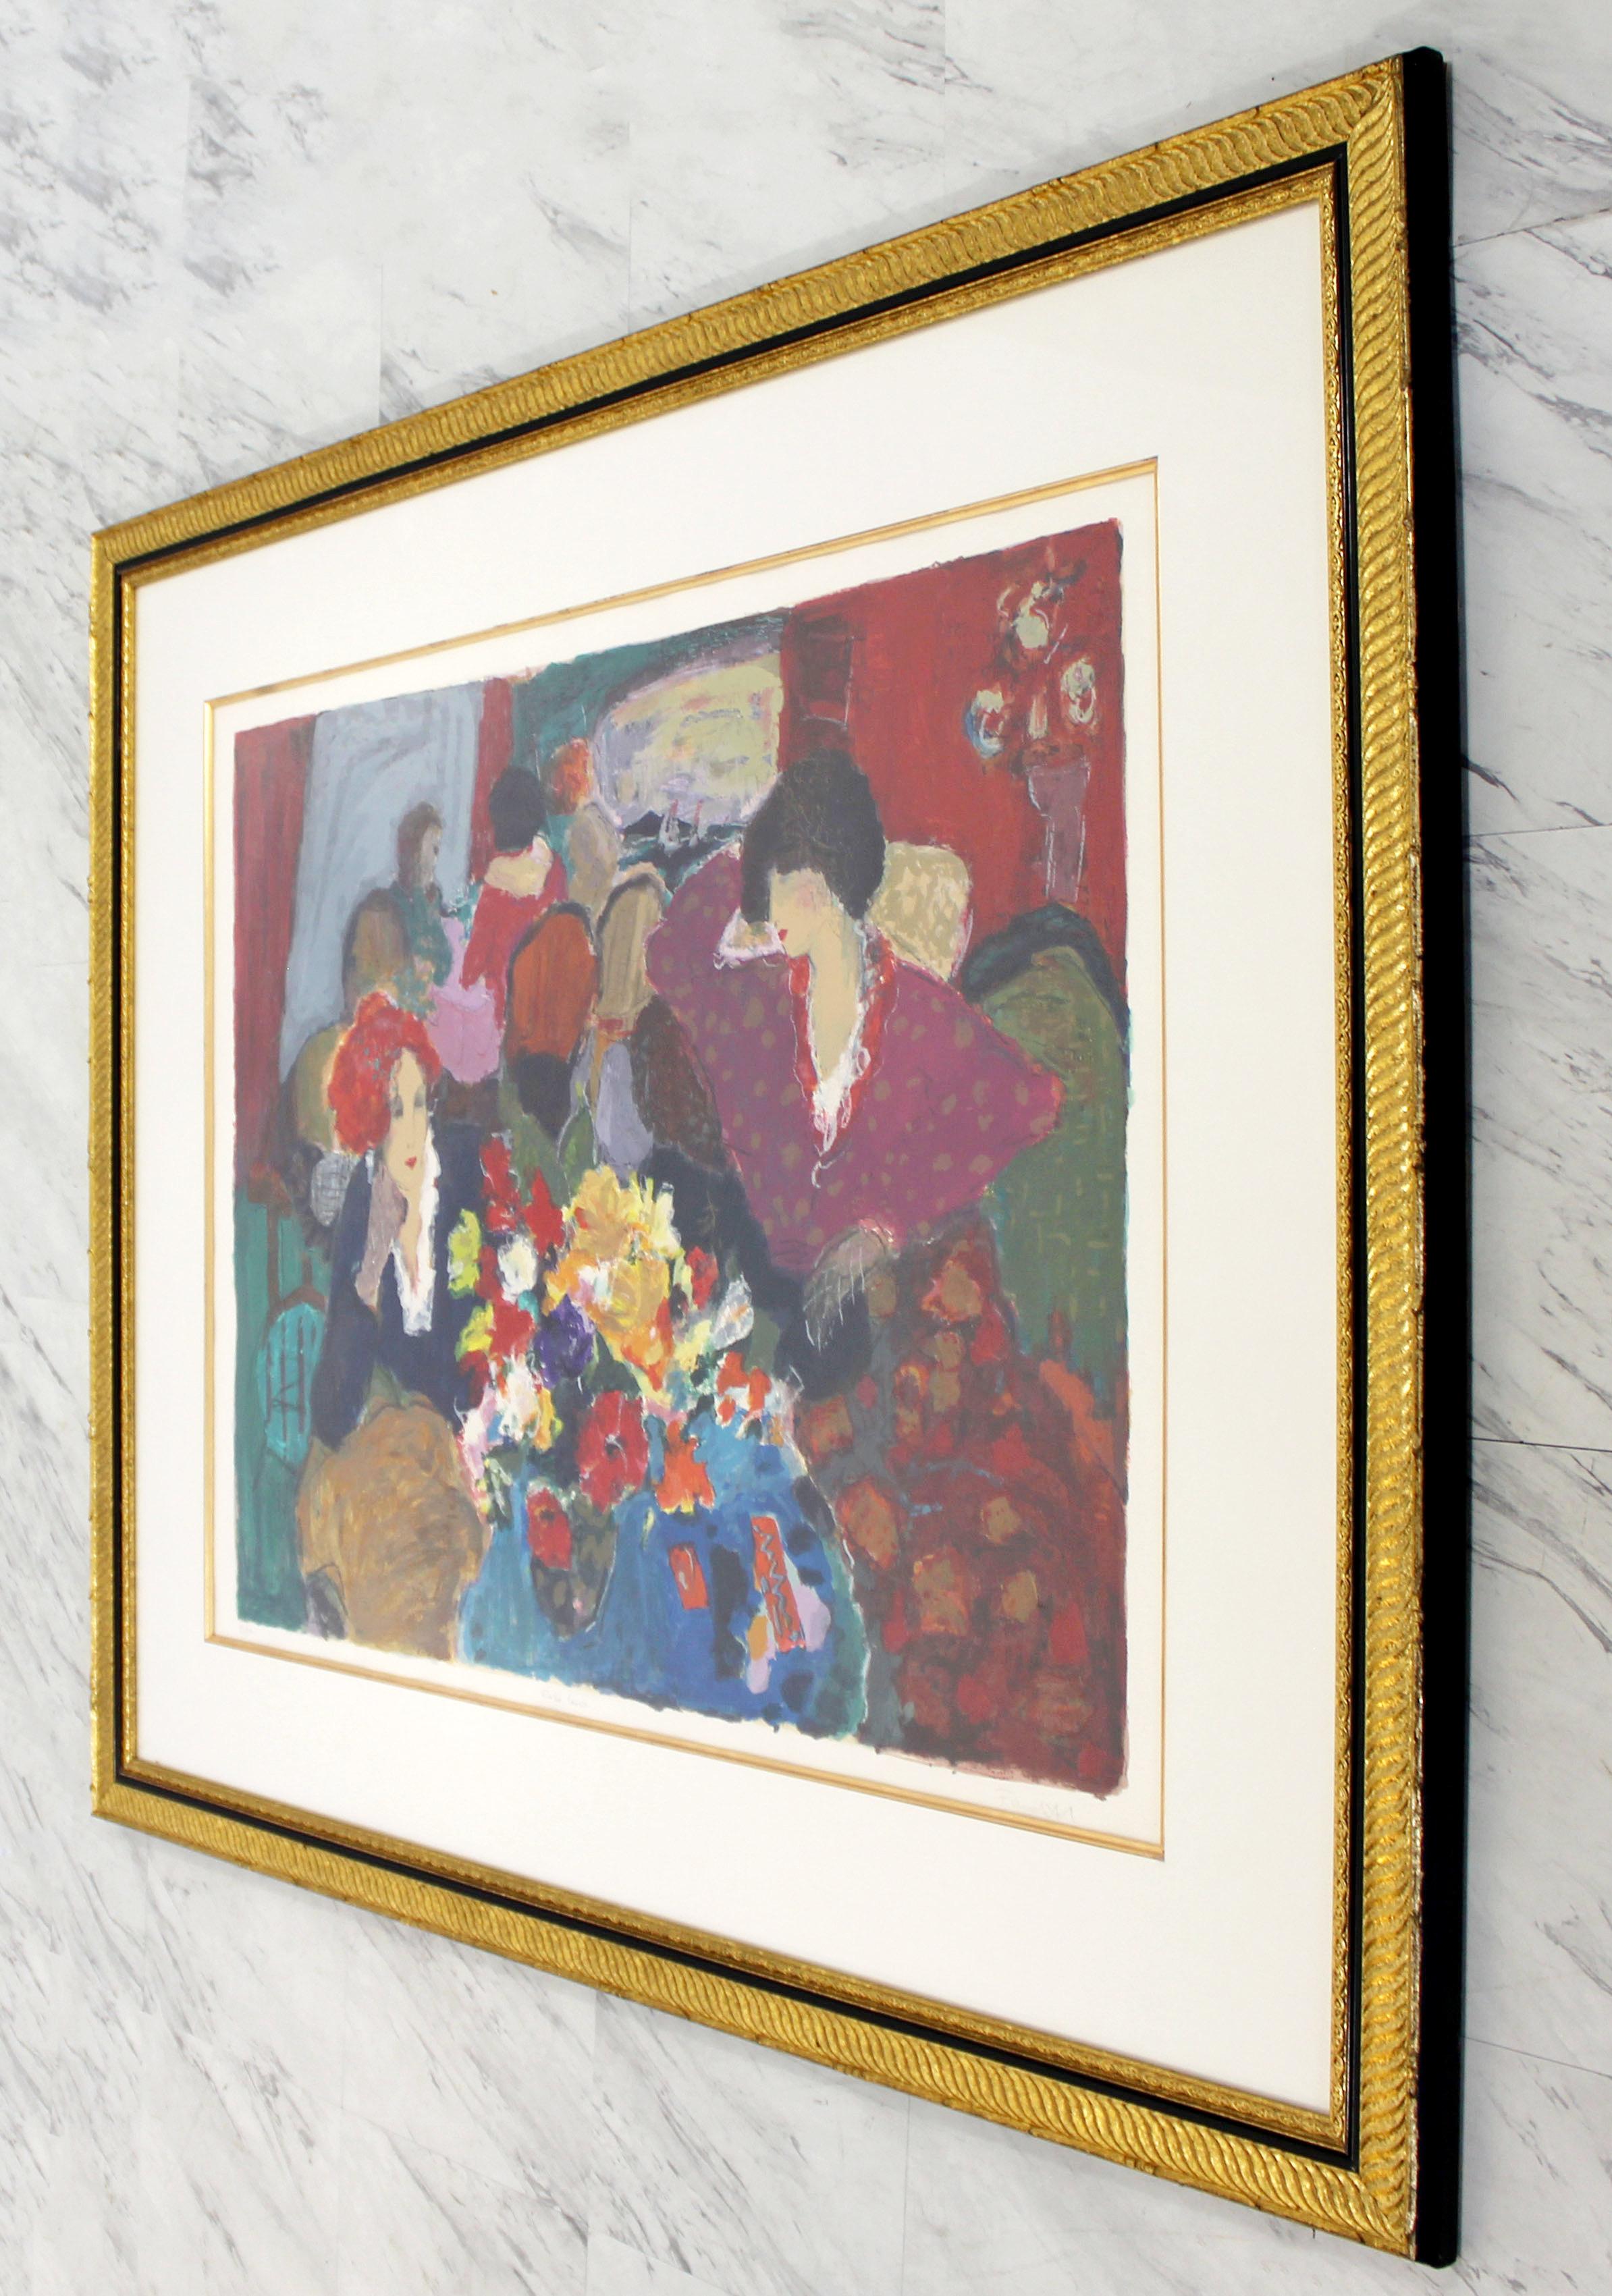 For your consideration is a gorgeous, framed litho signed and numbered 87/350 by Roy Woodard Fairchild. The title is Cafe Cresp. In excellent condition. The dimensions of the frame are 53.5